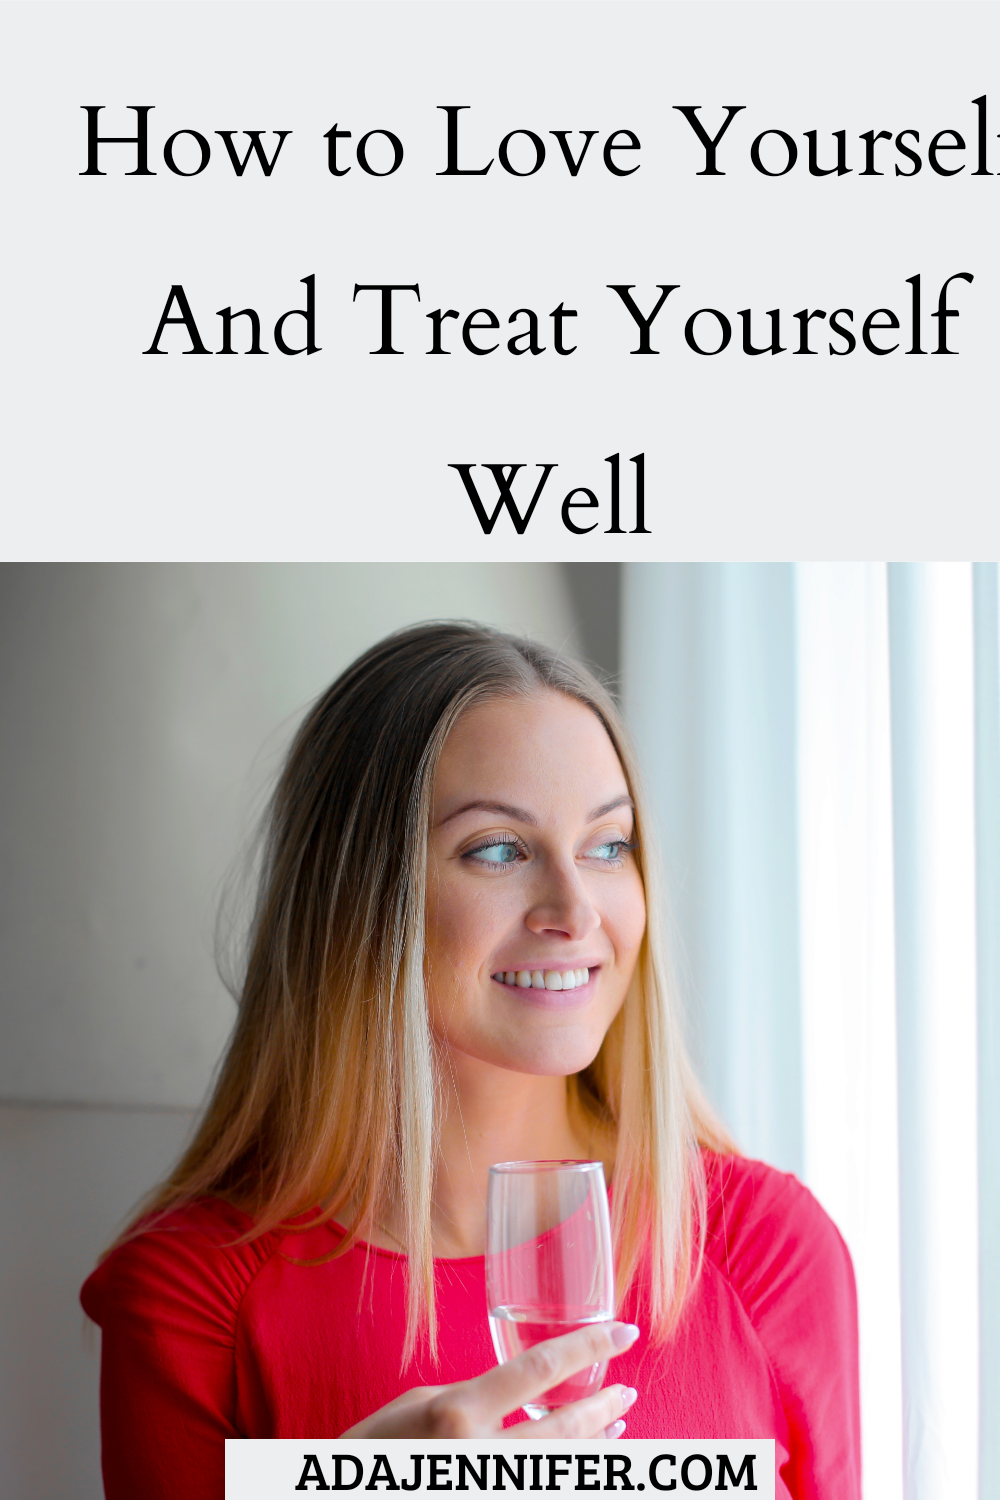 How to treat yourself well